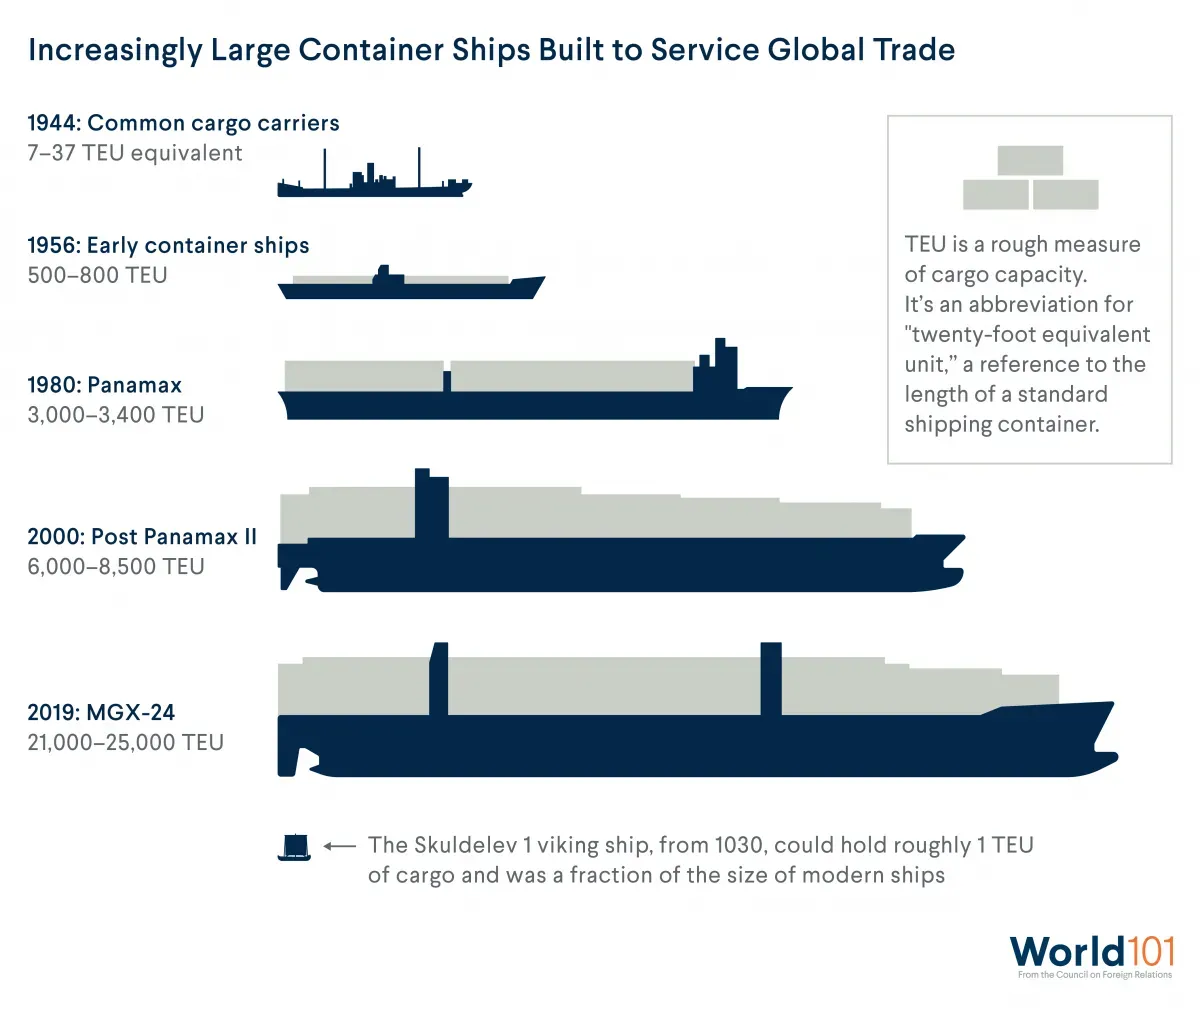 Graphic shows how the size of container ships has grown dramatically since they were first introduced in the 1950s. They now carry thouands of times more tradeable goods than common cargo ships did in the 1940s.For more info contact us at world101@cfr.org